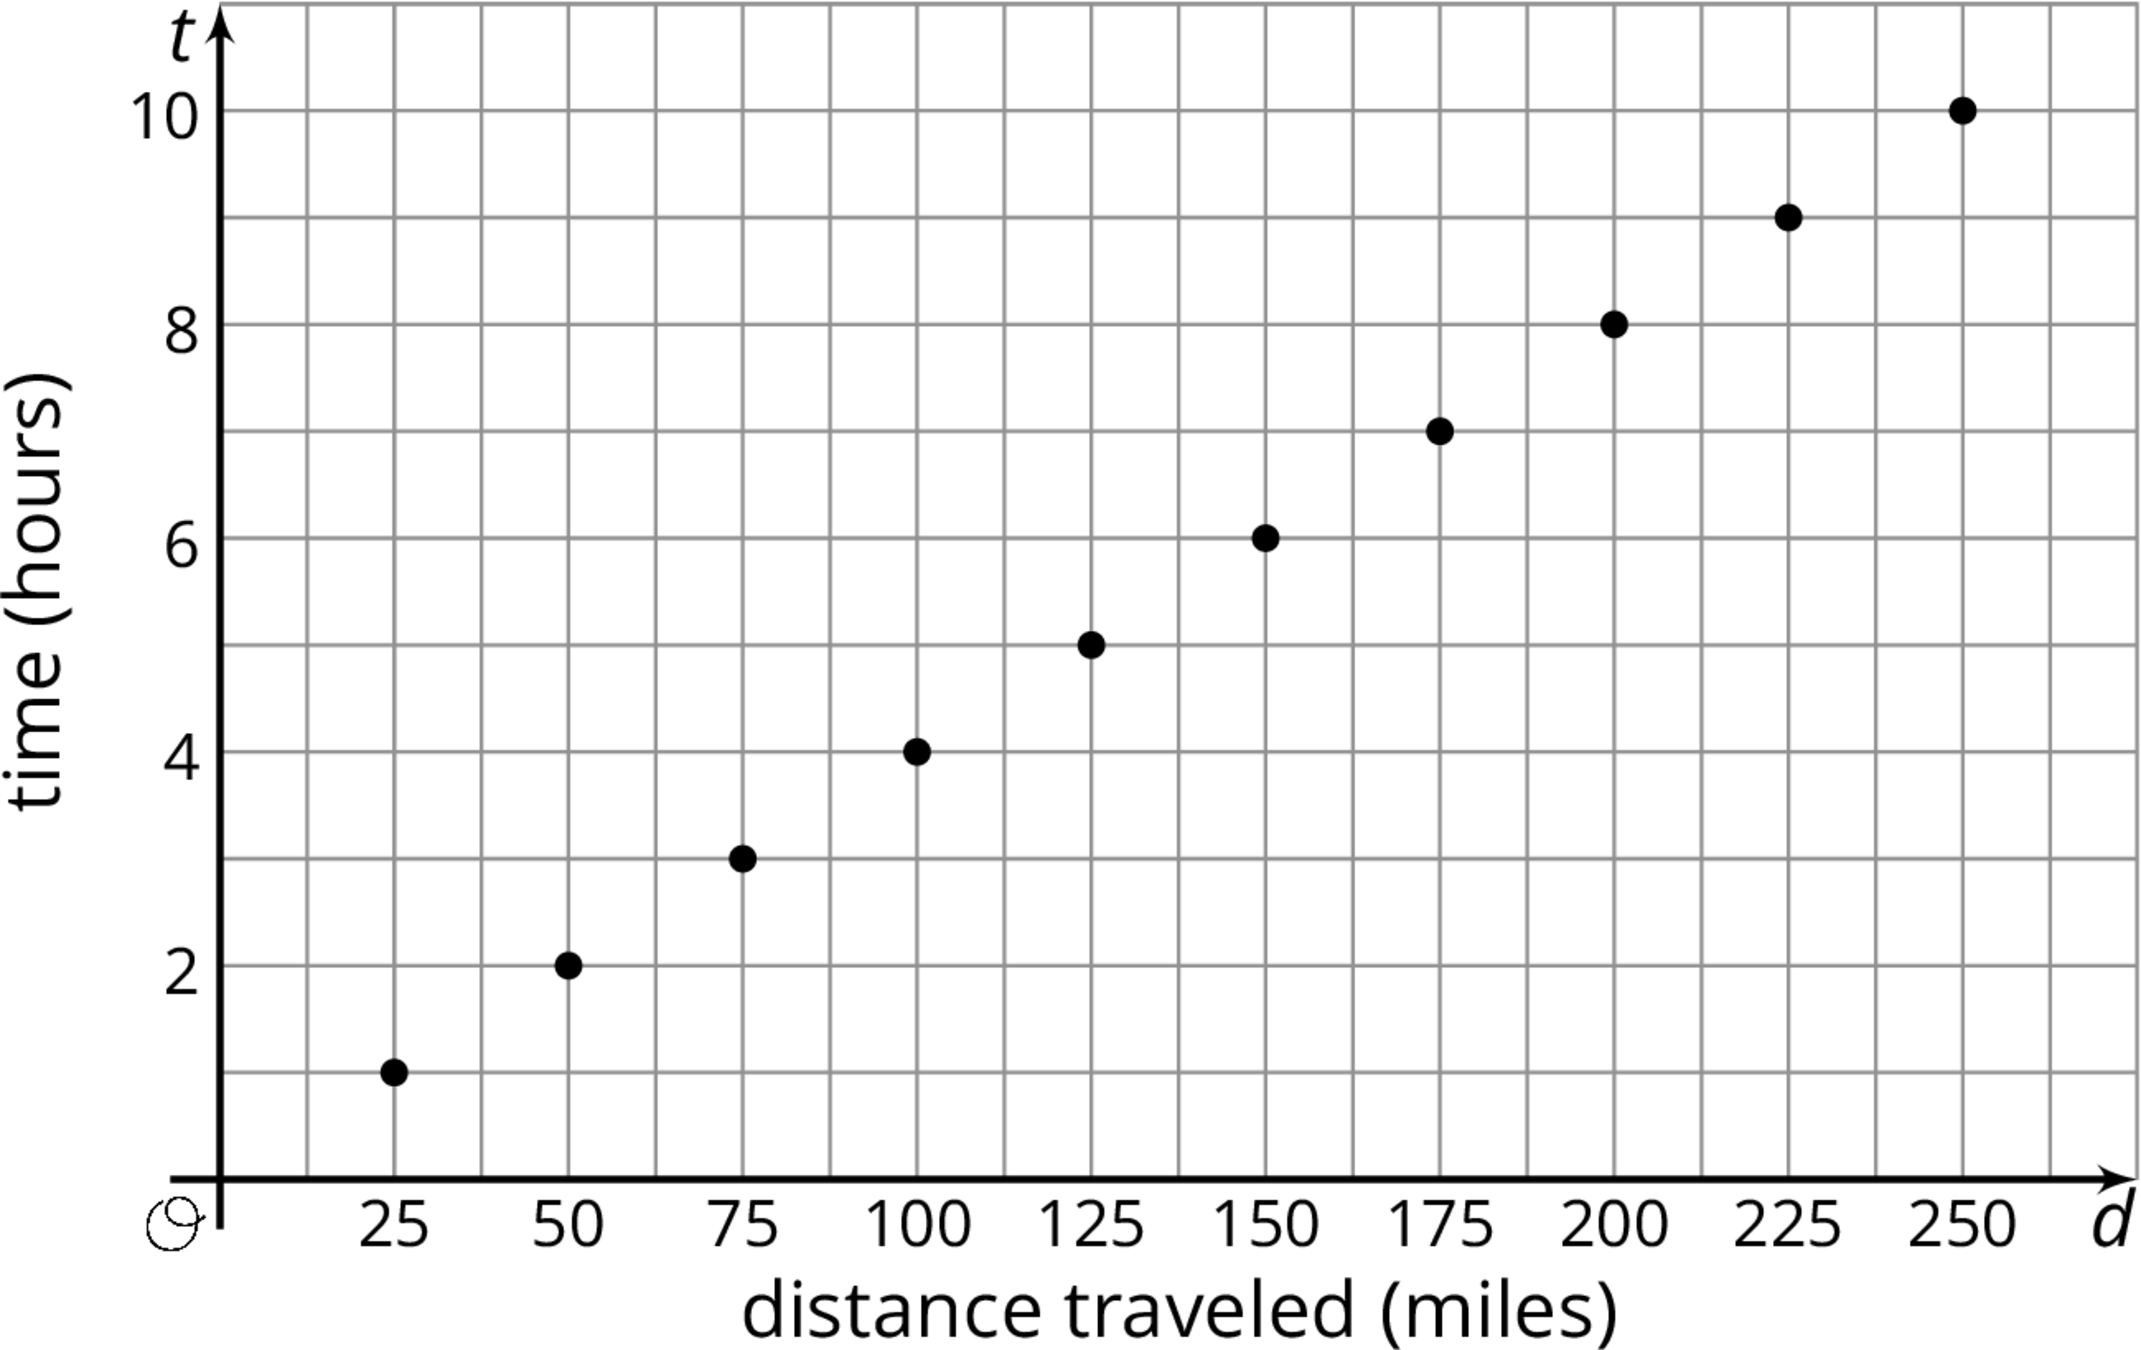 A graph of 10 points plotted on the coordinate plane with the origin labeled "O". The horizontal d axis is labeled "distance traveled in miles". The numbers 0 through 250, in increments of 25, are indicated, and there are vertical gridlines midway between. The vertical t axis is labeled "time in hours". The numbers 0 through 10, in increments of 2, are indicated, and there are horizontal gridlines midway between. The data are as follows: 25 comma 1. 50 comma 2. 75 comma 3. 100 comma 4. 125 comma 5. 150 comma 6. 175 comma 7. 200 comma 8. 225 comma 9. 250 comma 10.